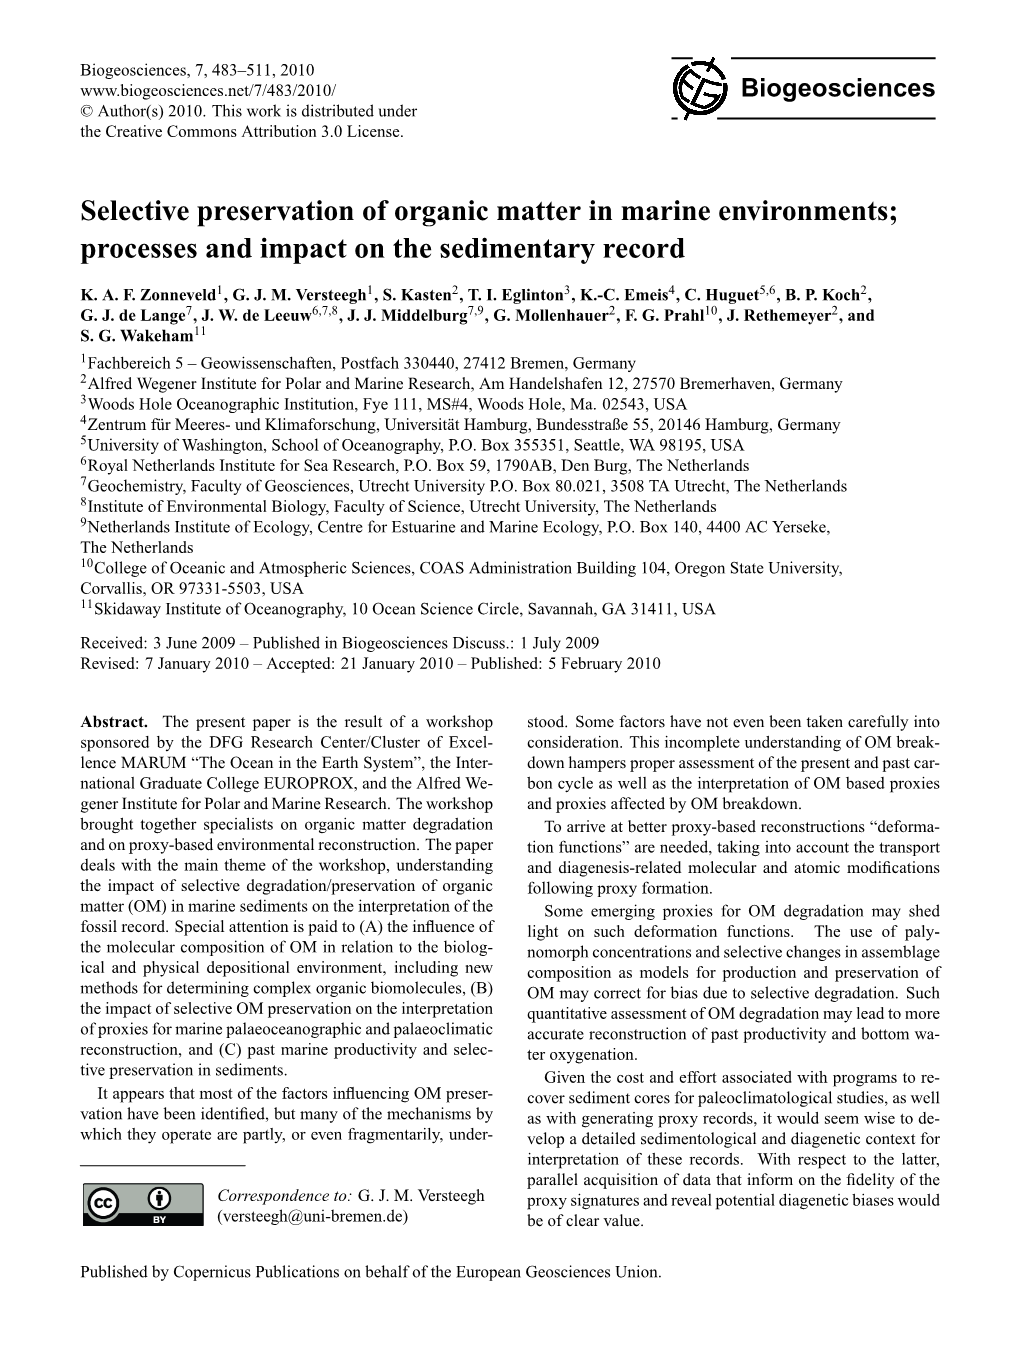 Selective Preservation of Organic Matter in Marine Environments; Processes and Impact on the Sedimentary Record